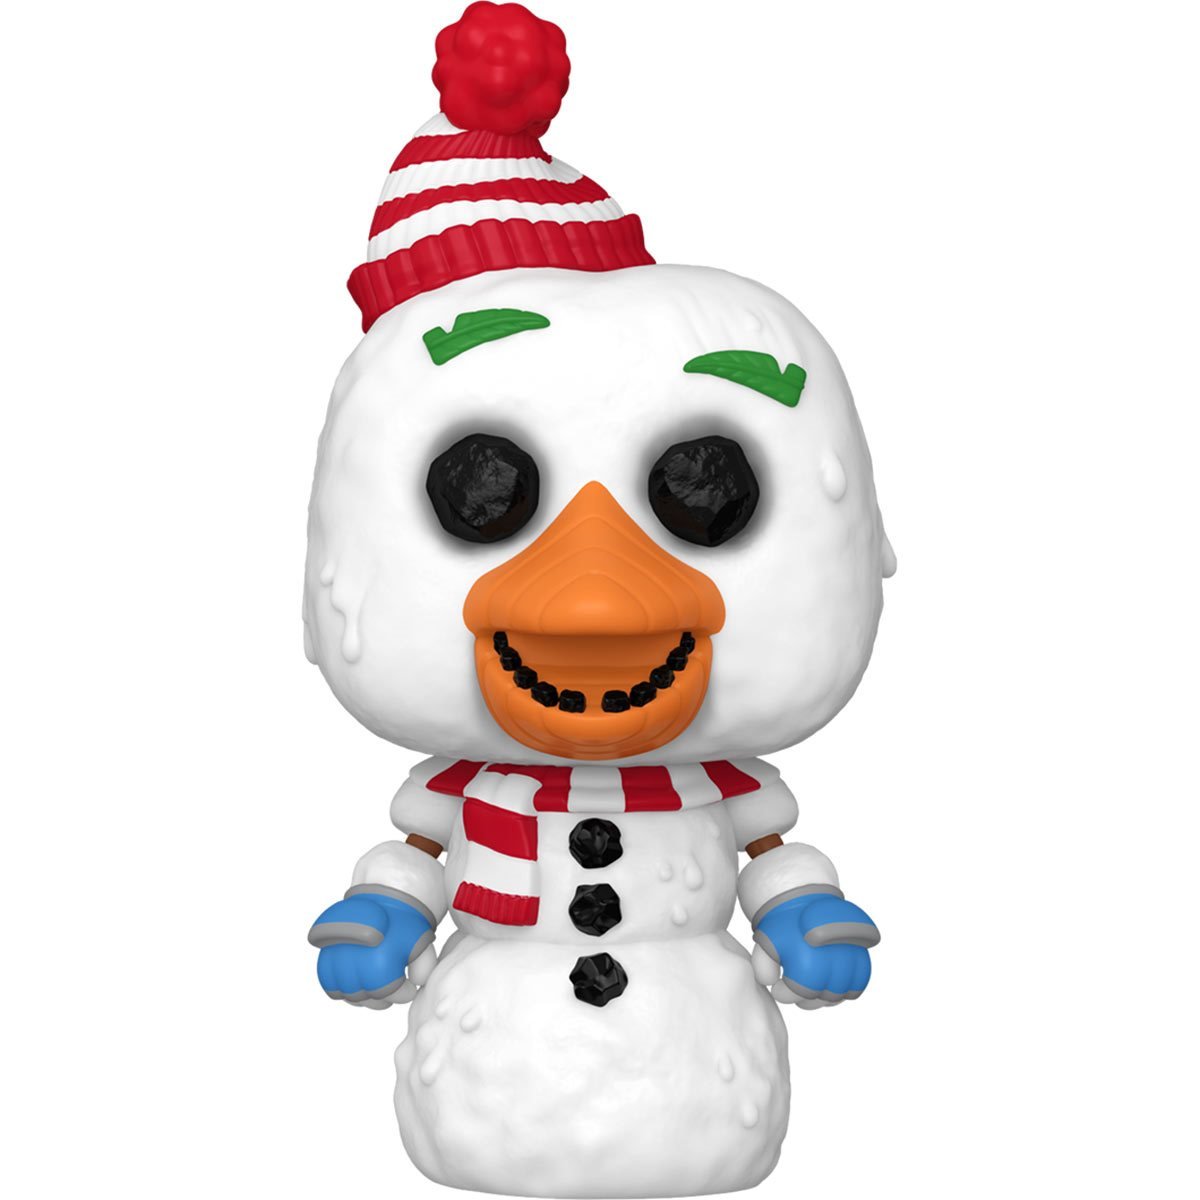 Five Nights at Freddy's Holiday Snow Chica Funko Pop! Vinyl Figure